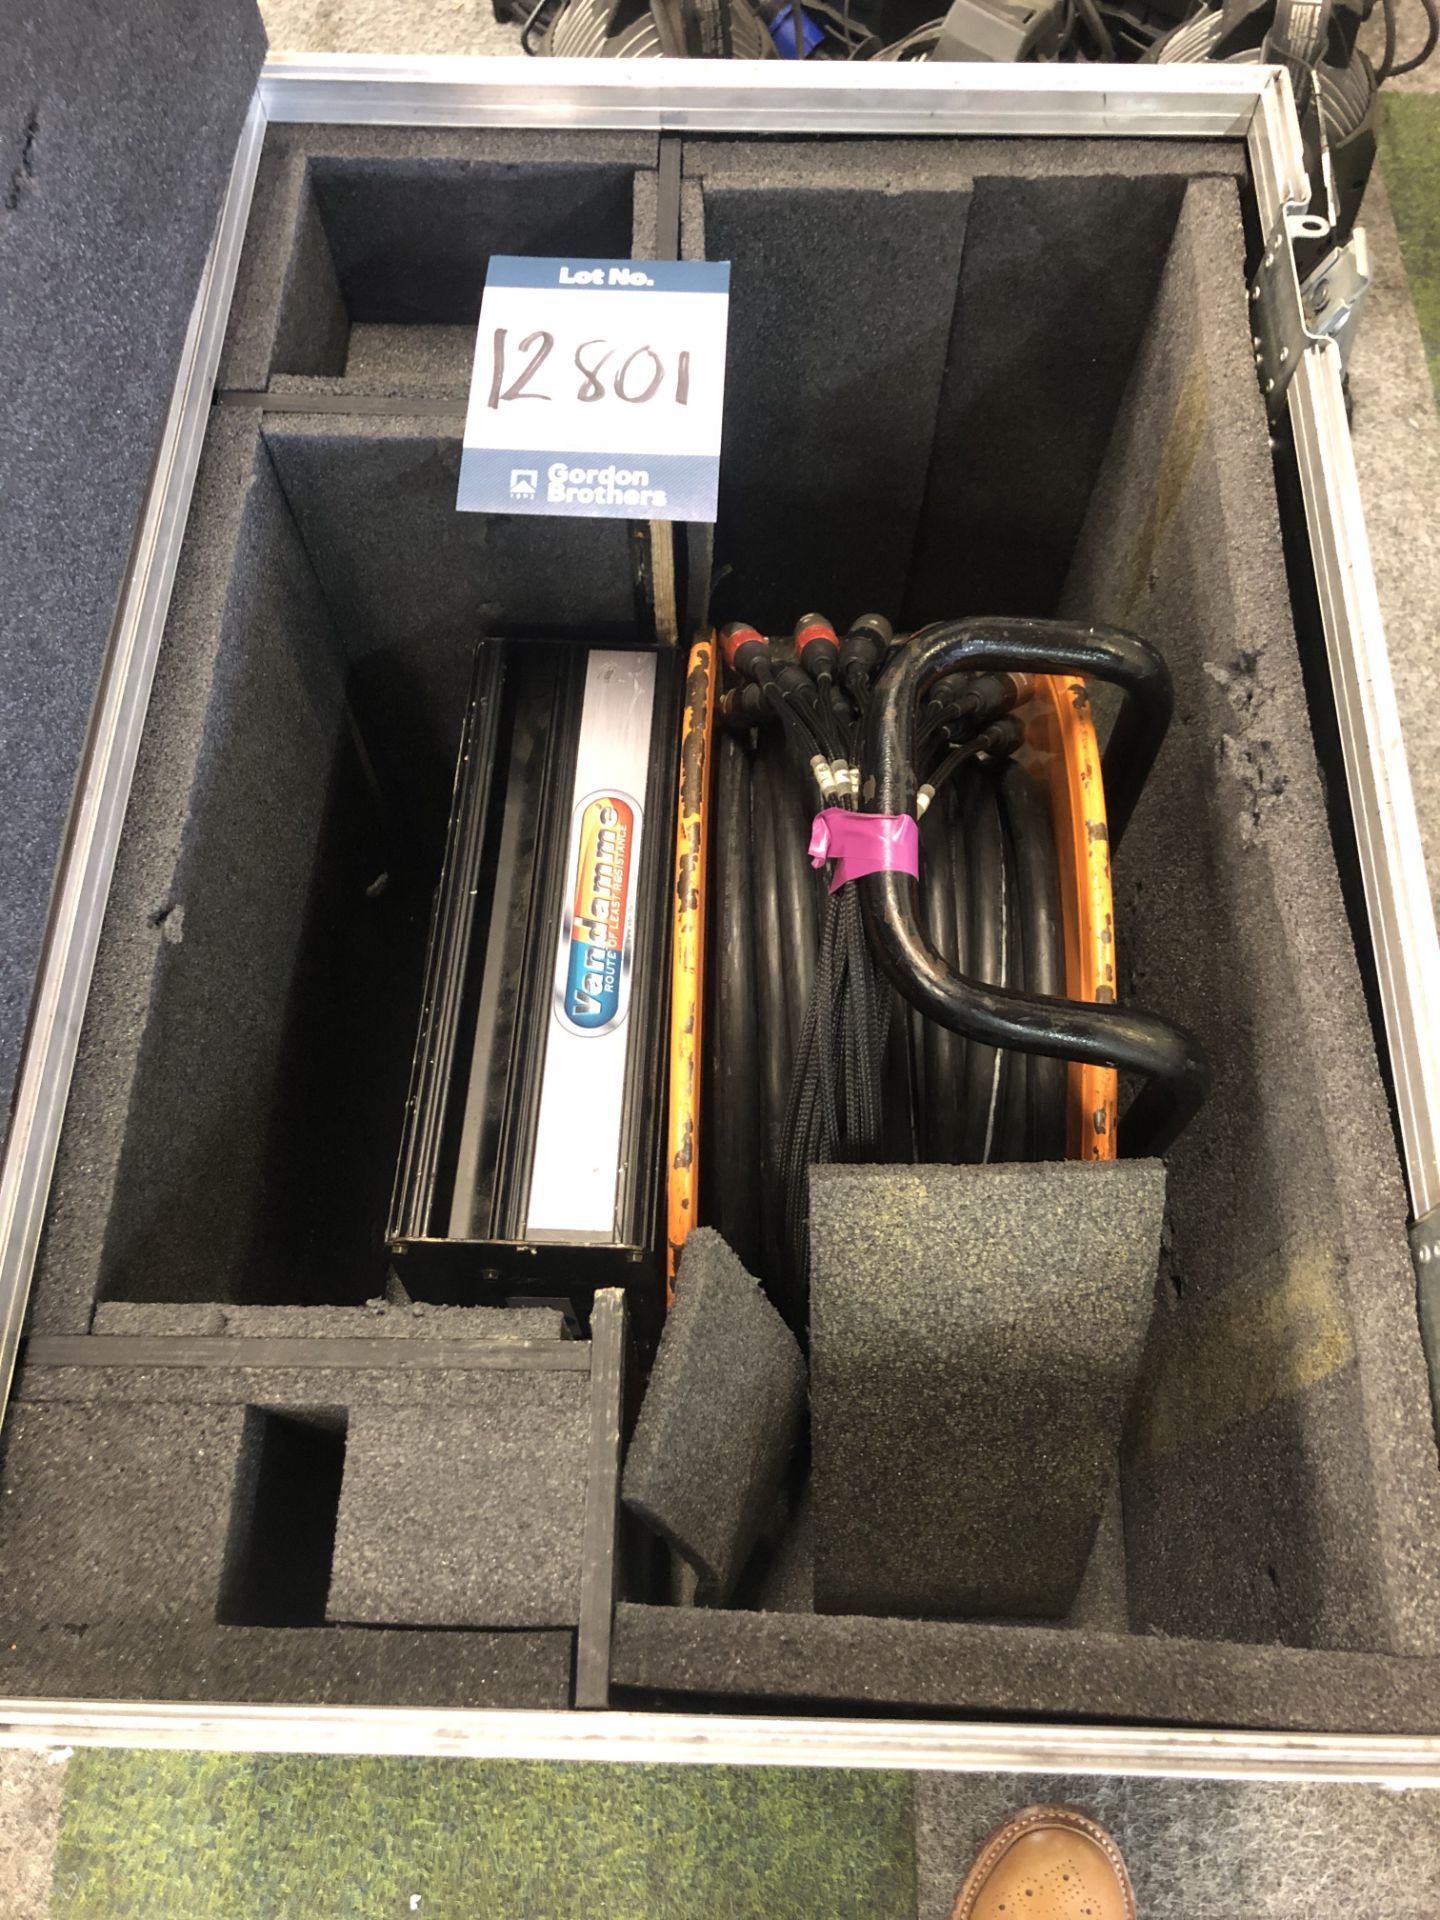 25m, 16 way multi-core cable in transit case